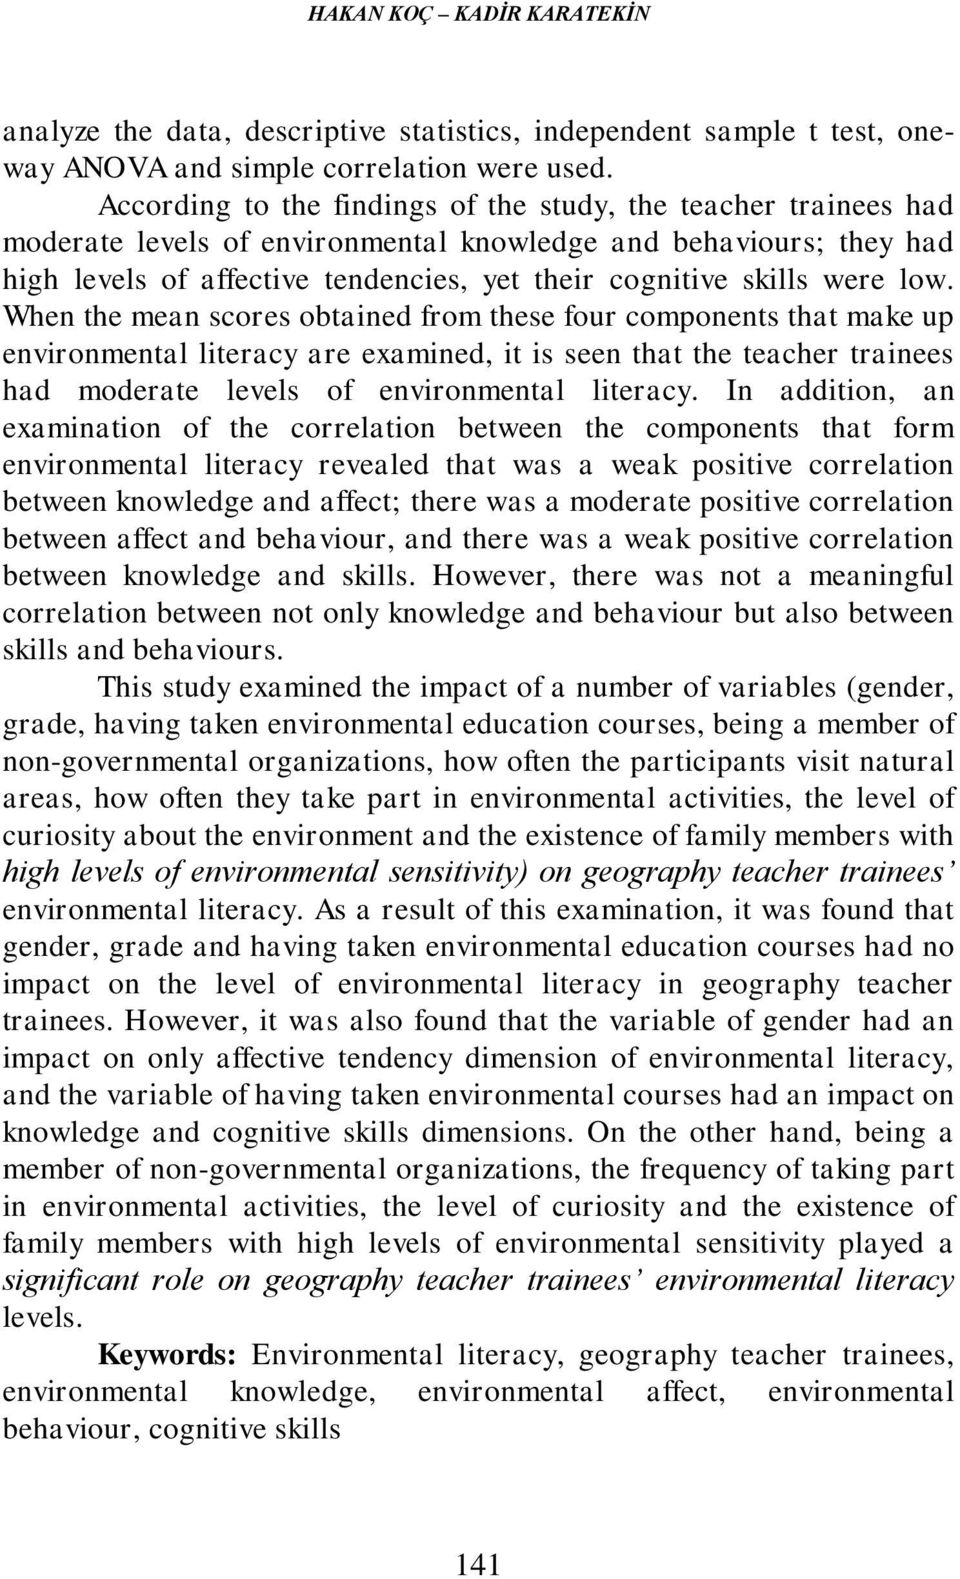 were low. When the mean scores obtained from these four components that make up environmental literacy are examined, it is seen that the teacher trainees had moderate levels of environmental literacy.